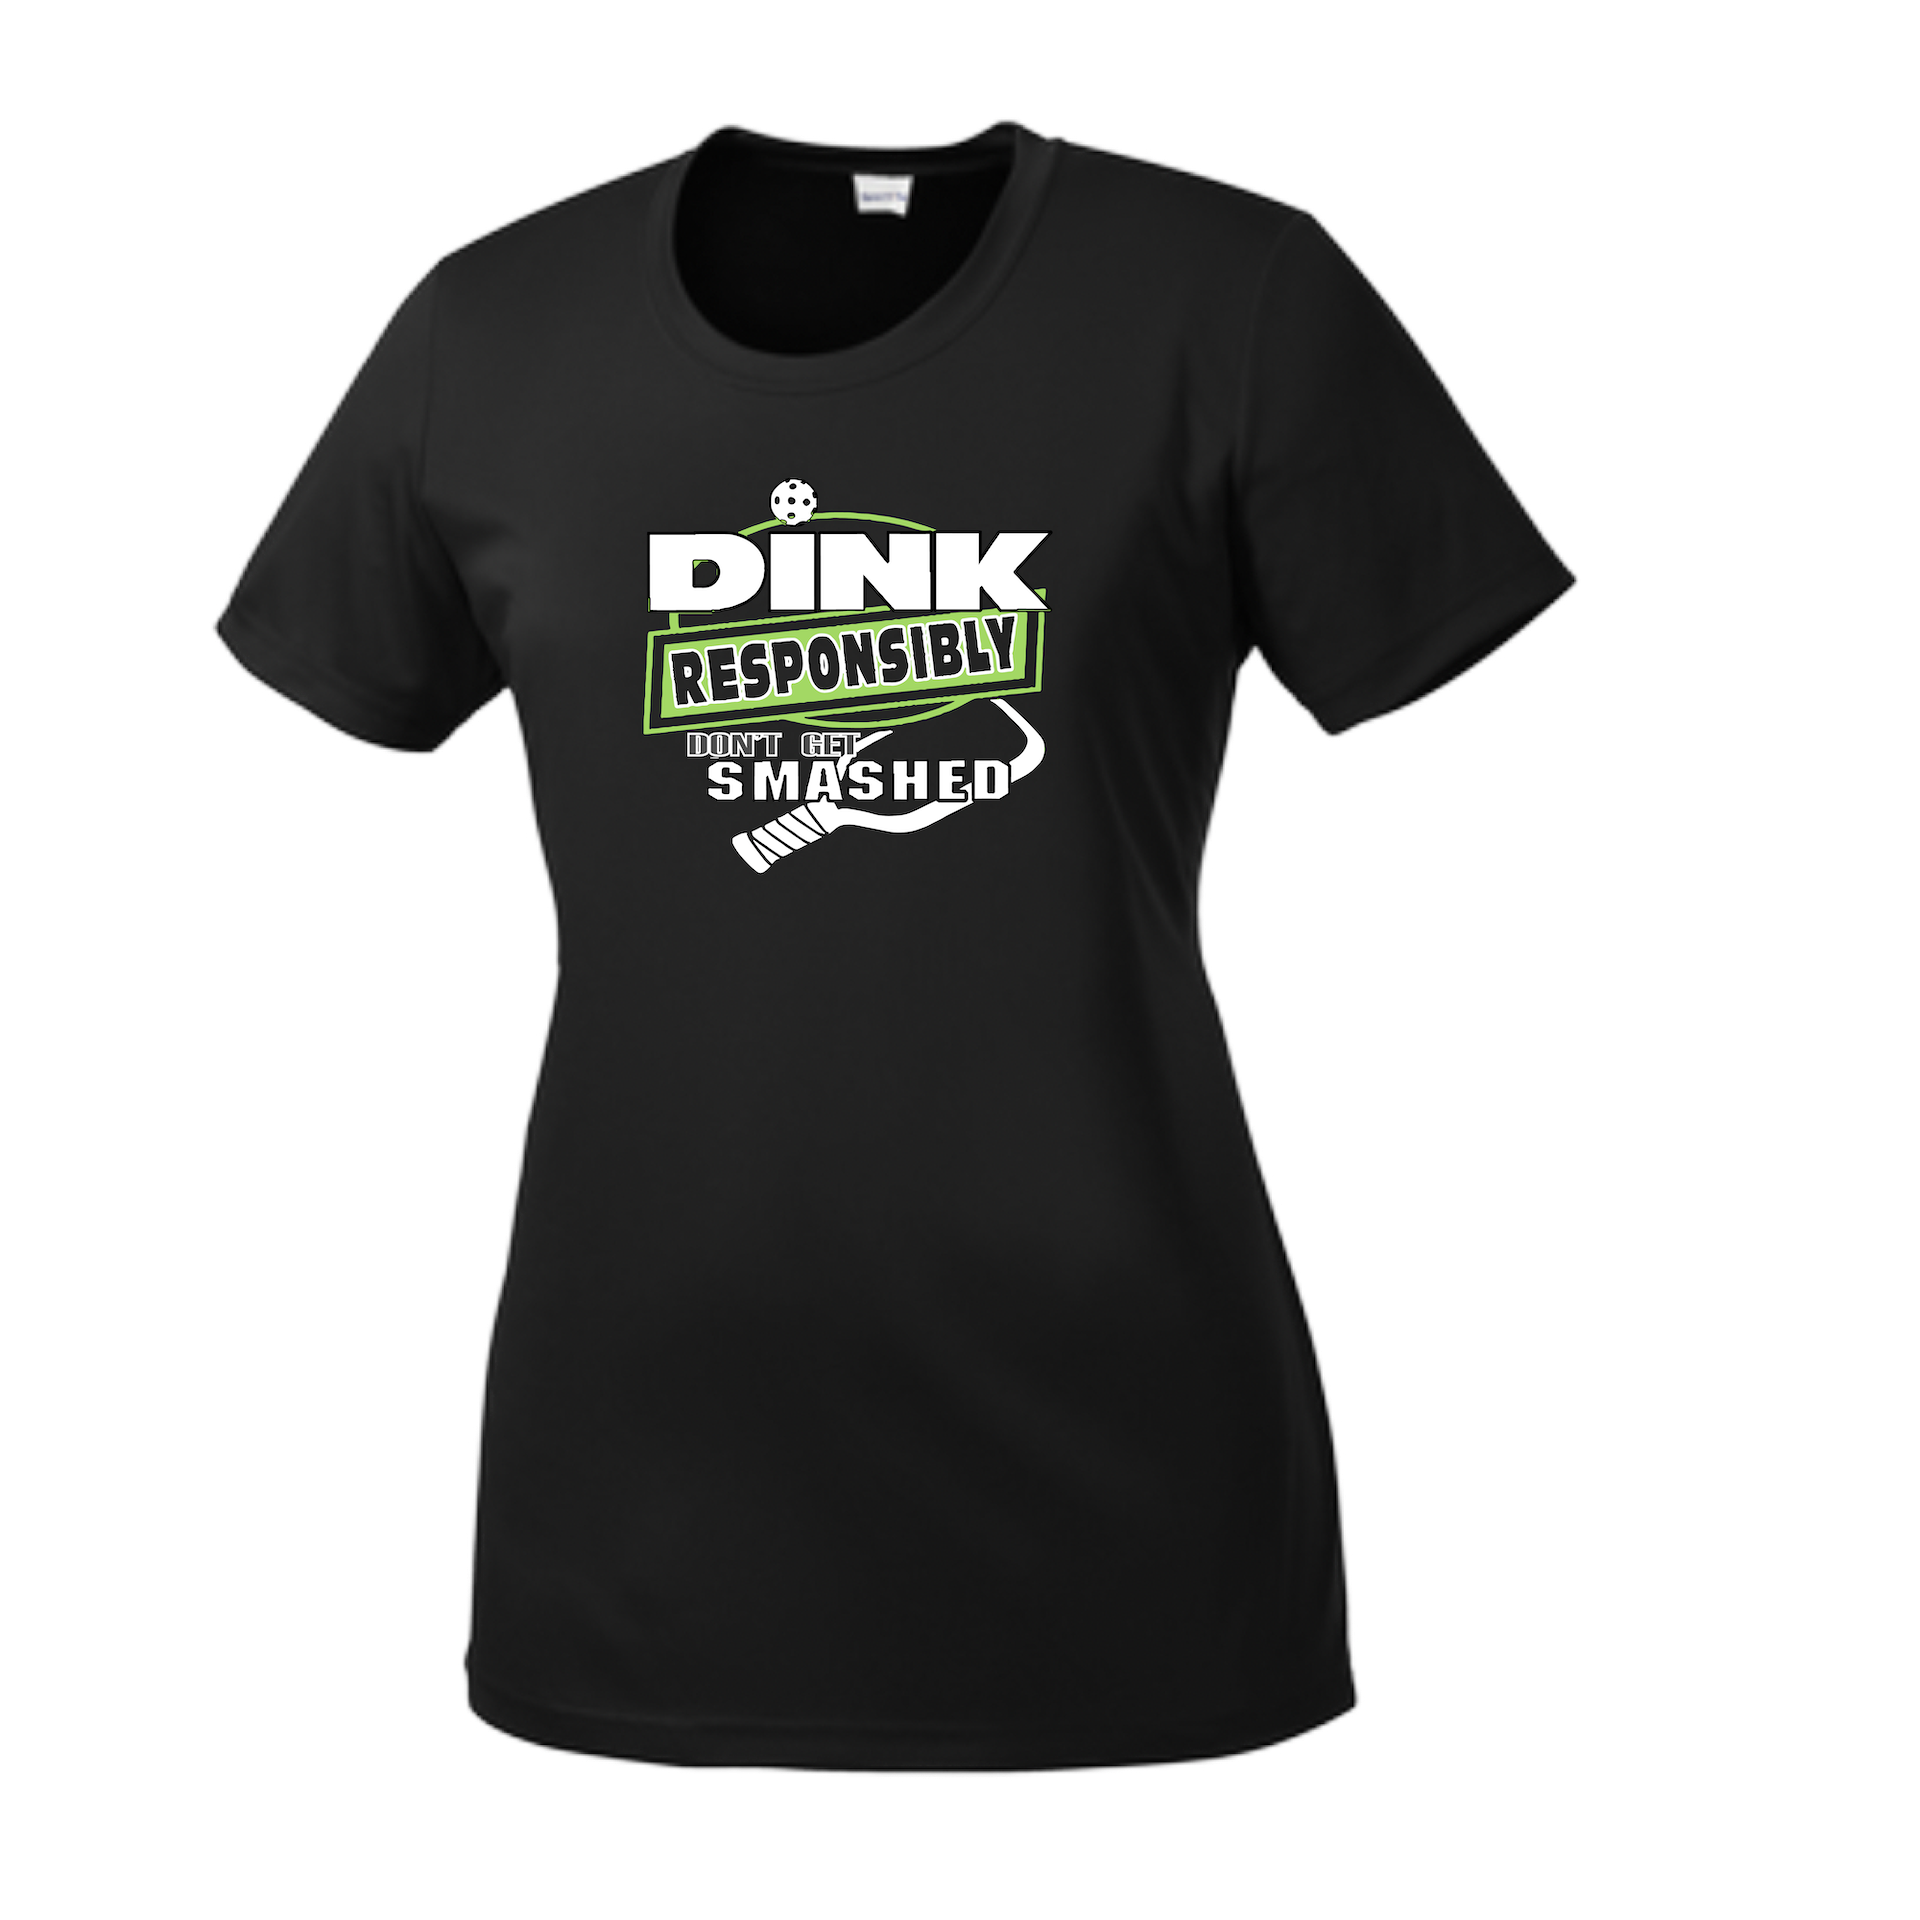 Pickleball Design: Dink Responsibly - Don't Get Smashed  Women's Style:  Short-Sleeve Crew-Neck  Shirts are lightweight, roomy and highly breathable. These moisture-wicking shirts are designed for athletic performance. They feature PosiCharge technology to lock in color and prevent logos from fading. Removable tag and set-in sleeves for comfort.